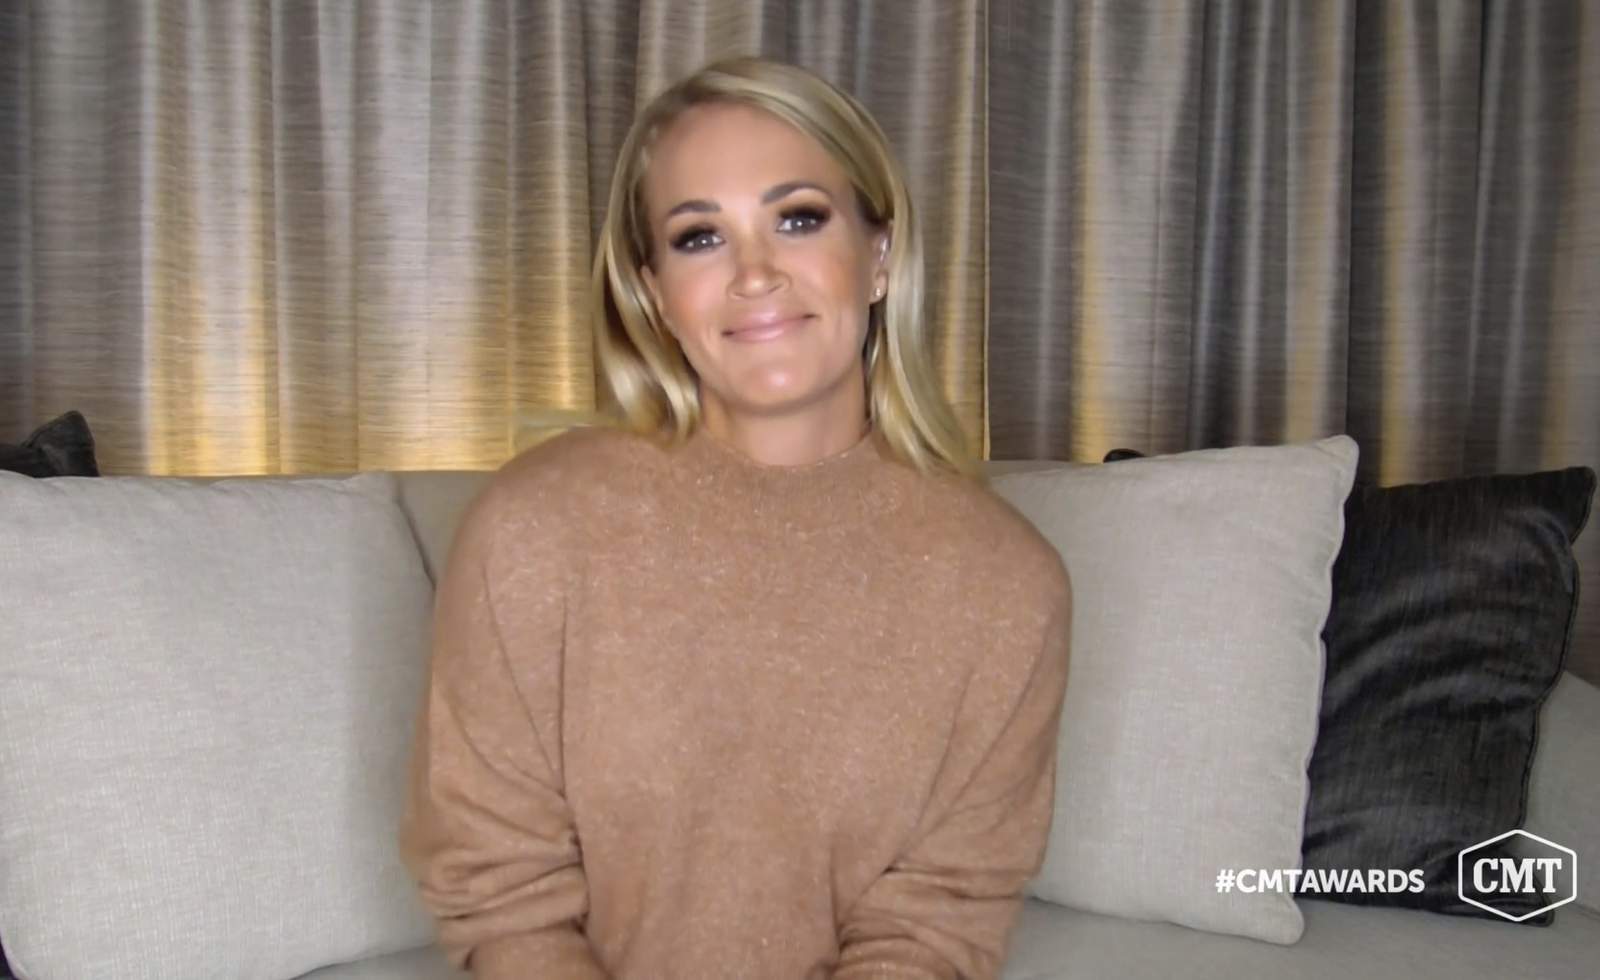 Carrie Underwood named top artist at CMT Music Awards